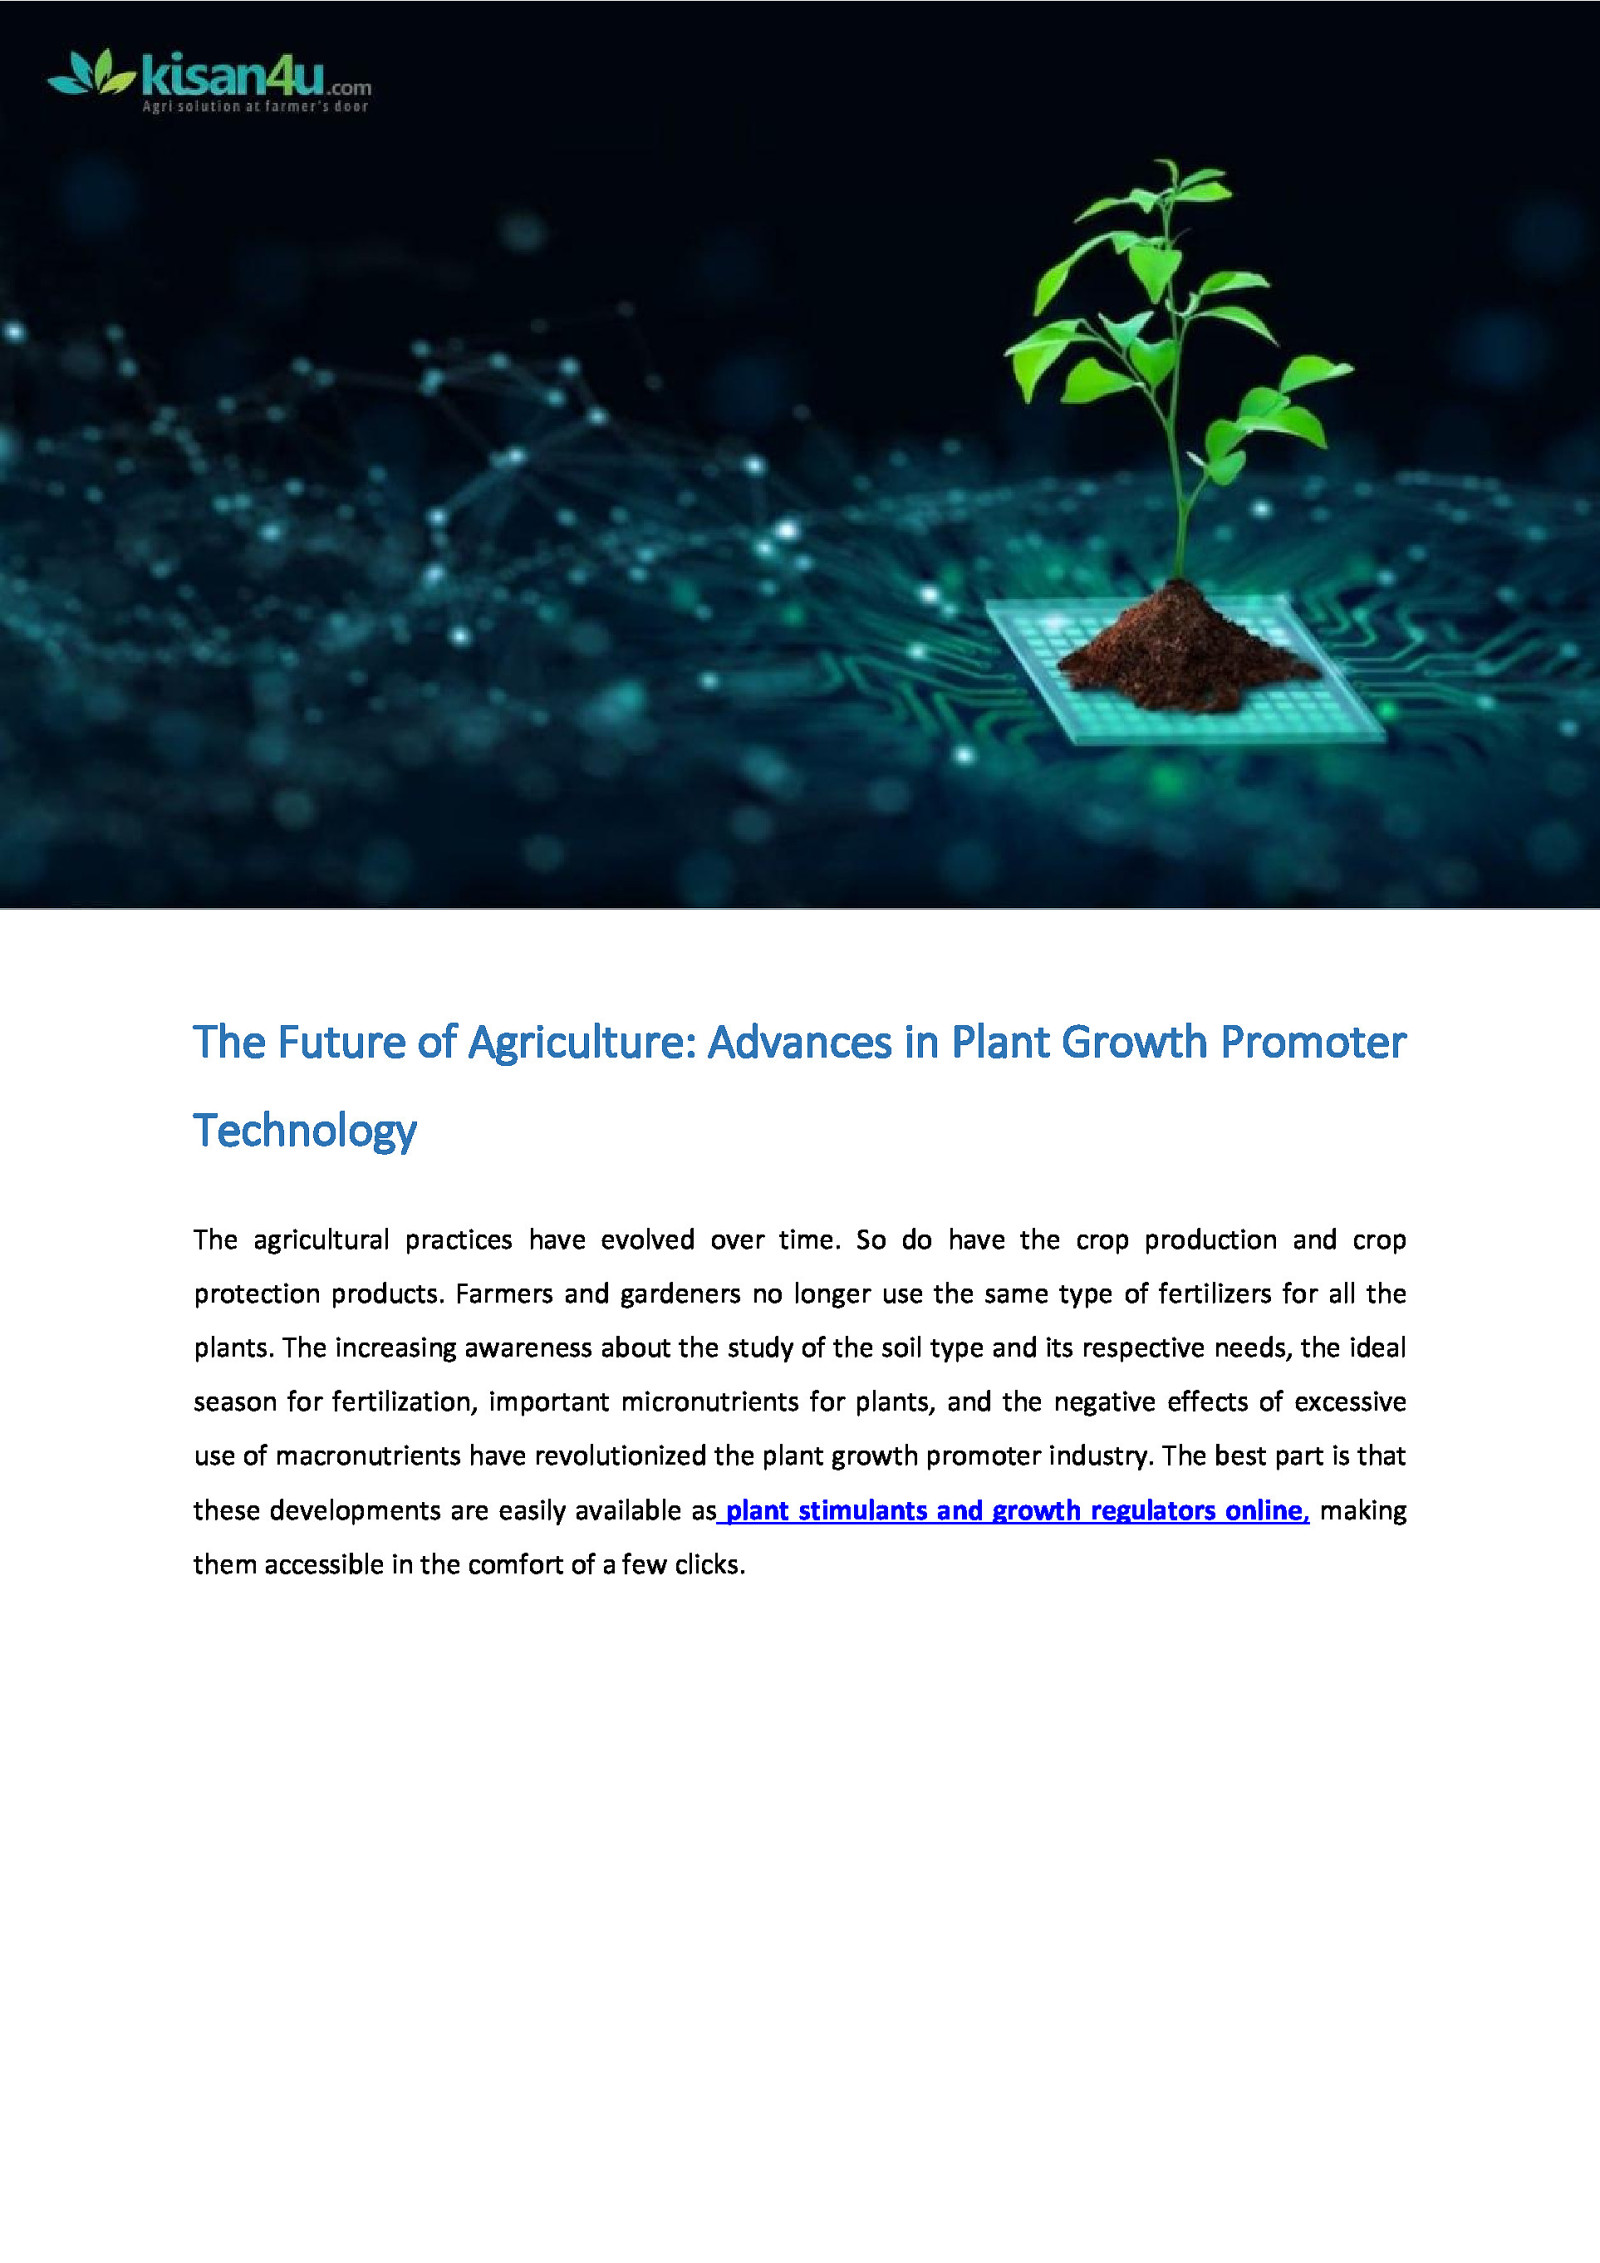 The Future of Agriculture: Advances in Plant Growth Promoter Technology